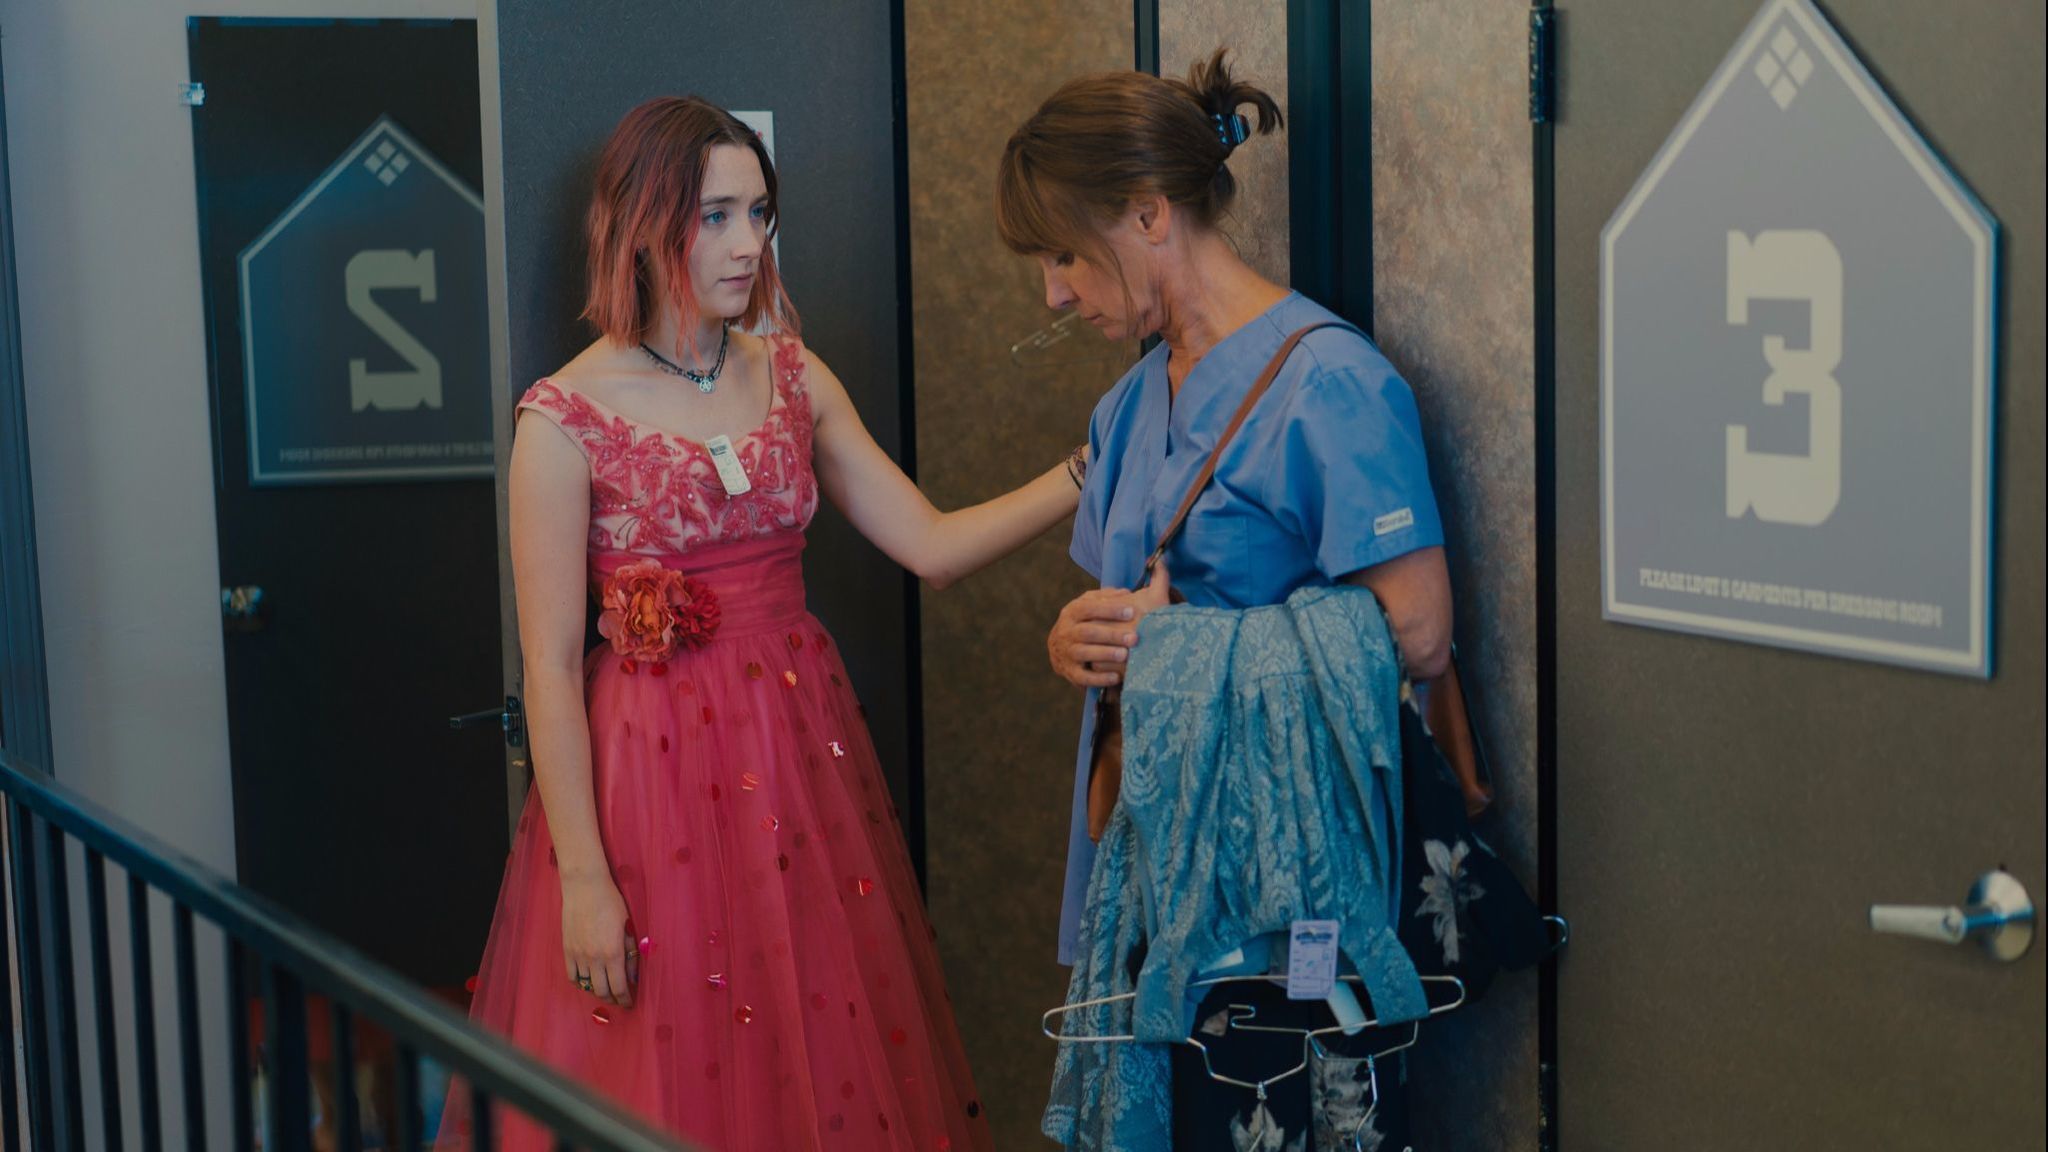 Image result for lady bird